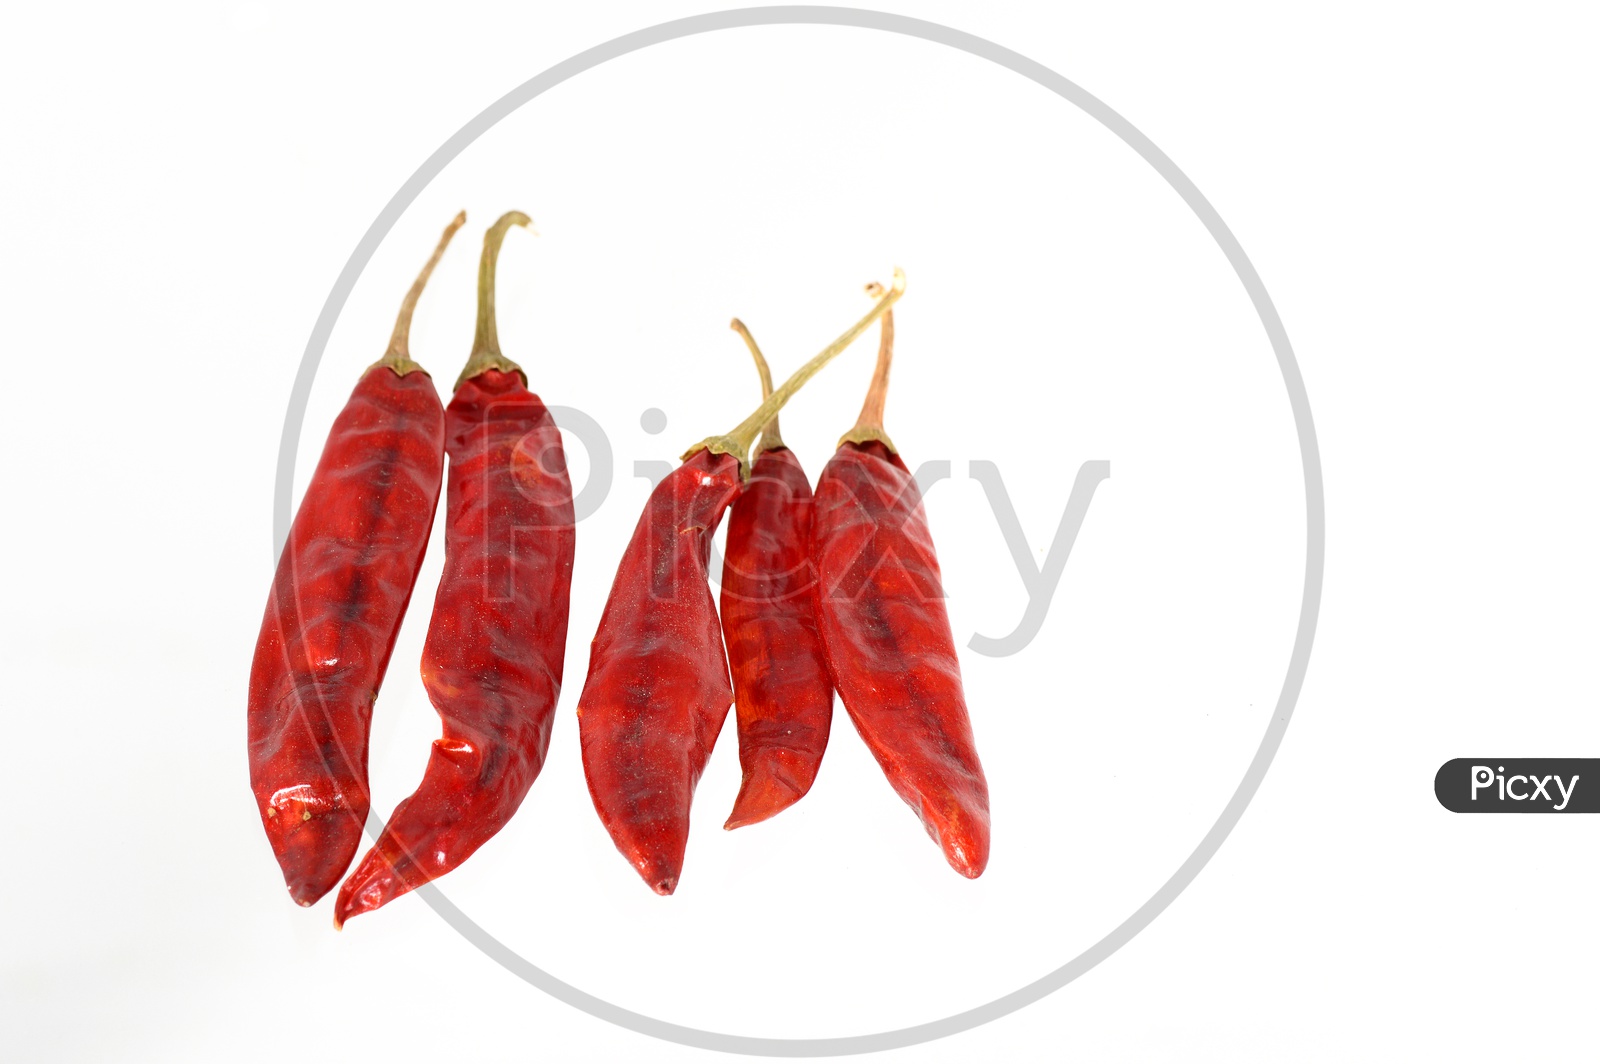 Red Chilli peppers isolated on white